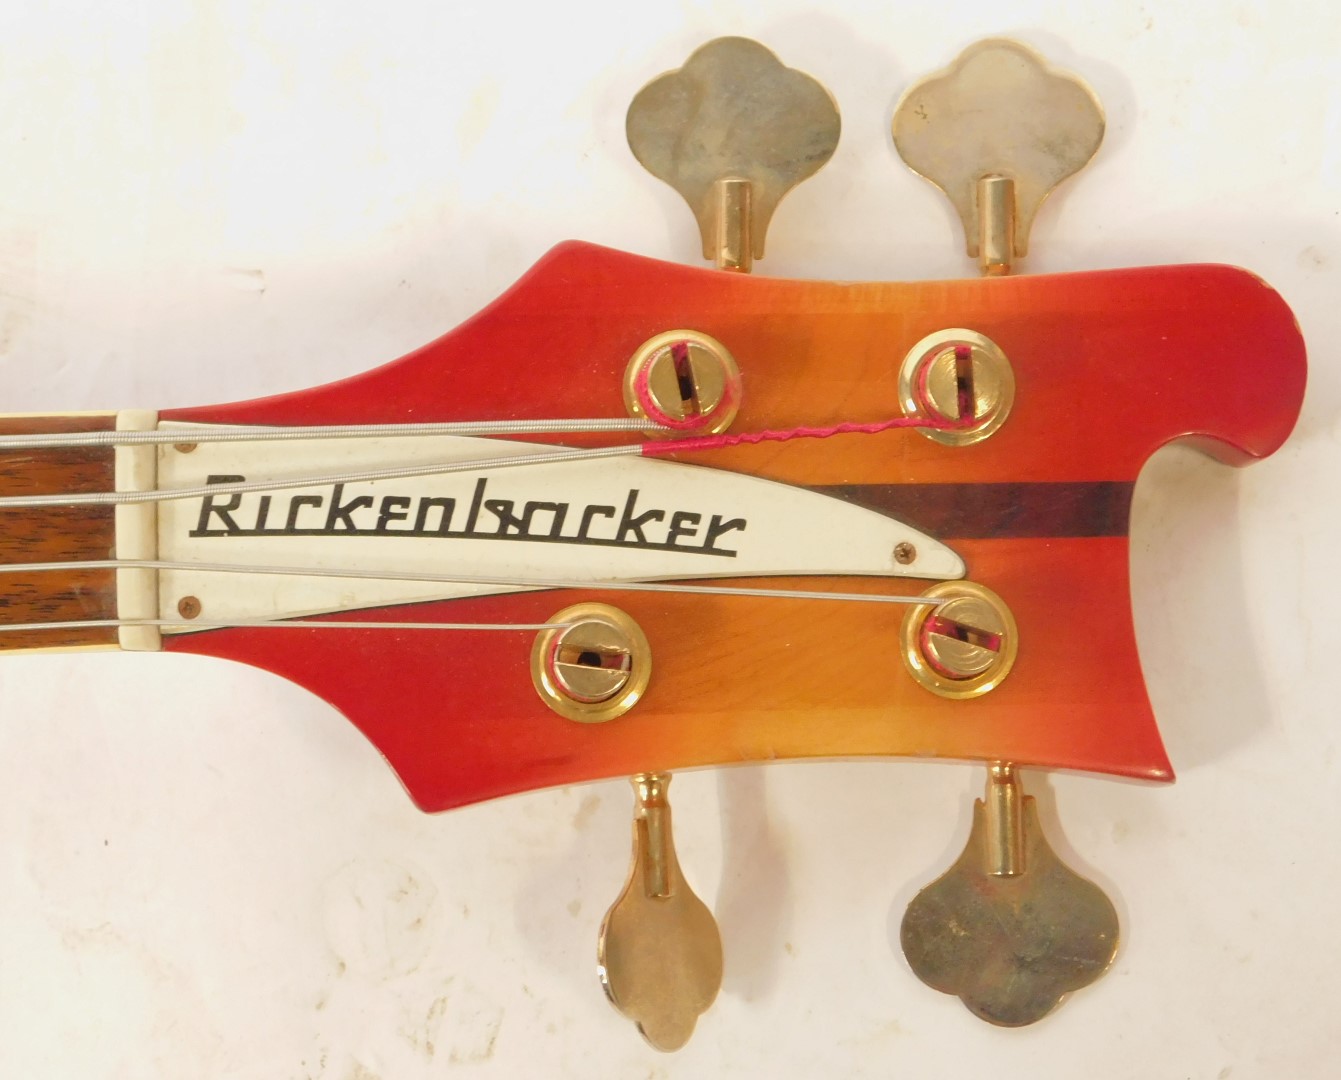 A Rirkenbacker electric bass guitar, the body in red, with the front panel fading to a yellow, the - Image 4 of 7